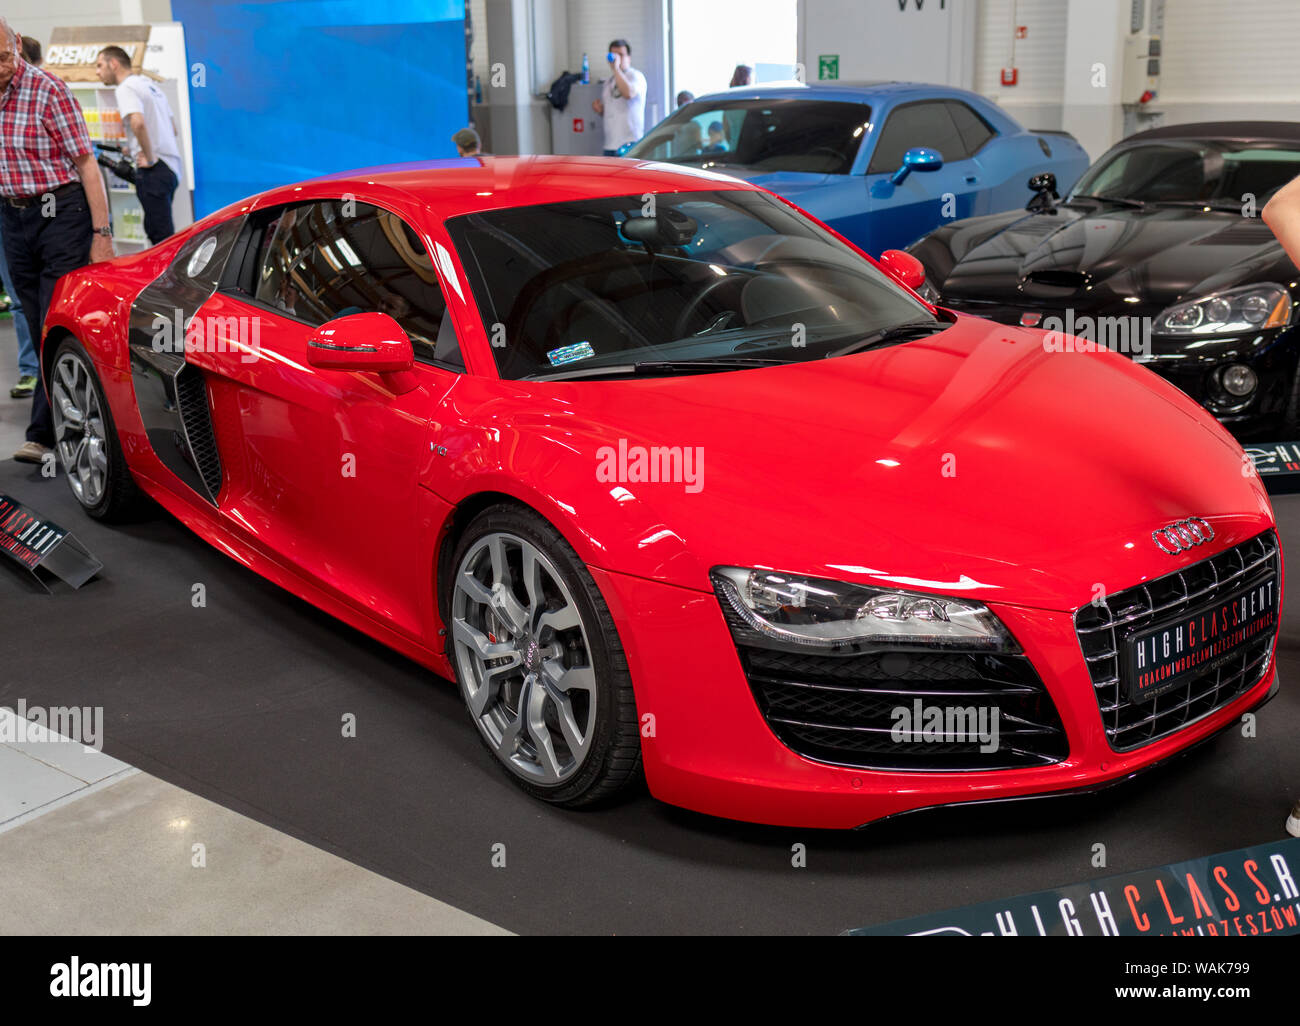 Cracow, Poland - May 18, 2019: Tuned Audi displayed at Moto Show in Cracow  Poland. Exhibitors present most interesting aspects of the automotive in  Stock Photo - Alamy